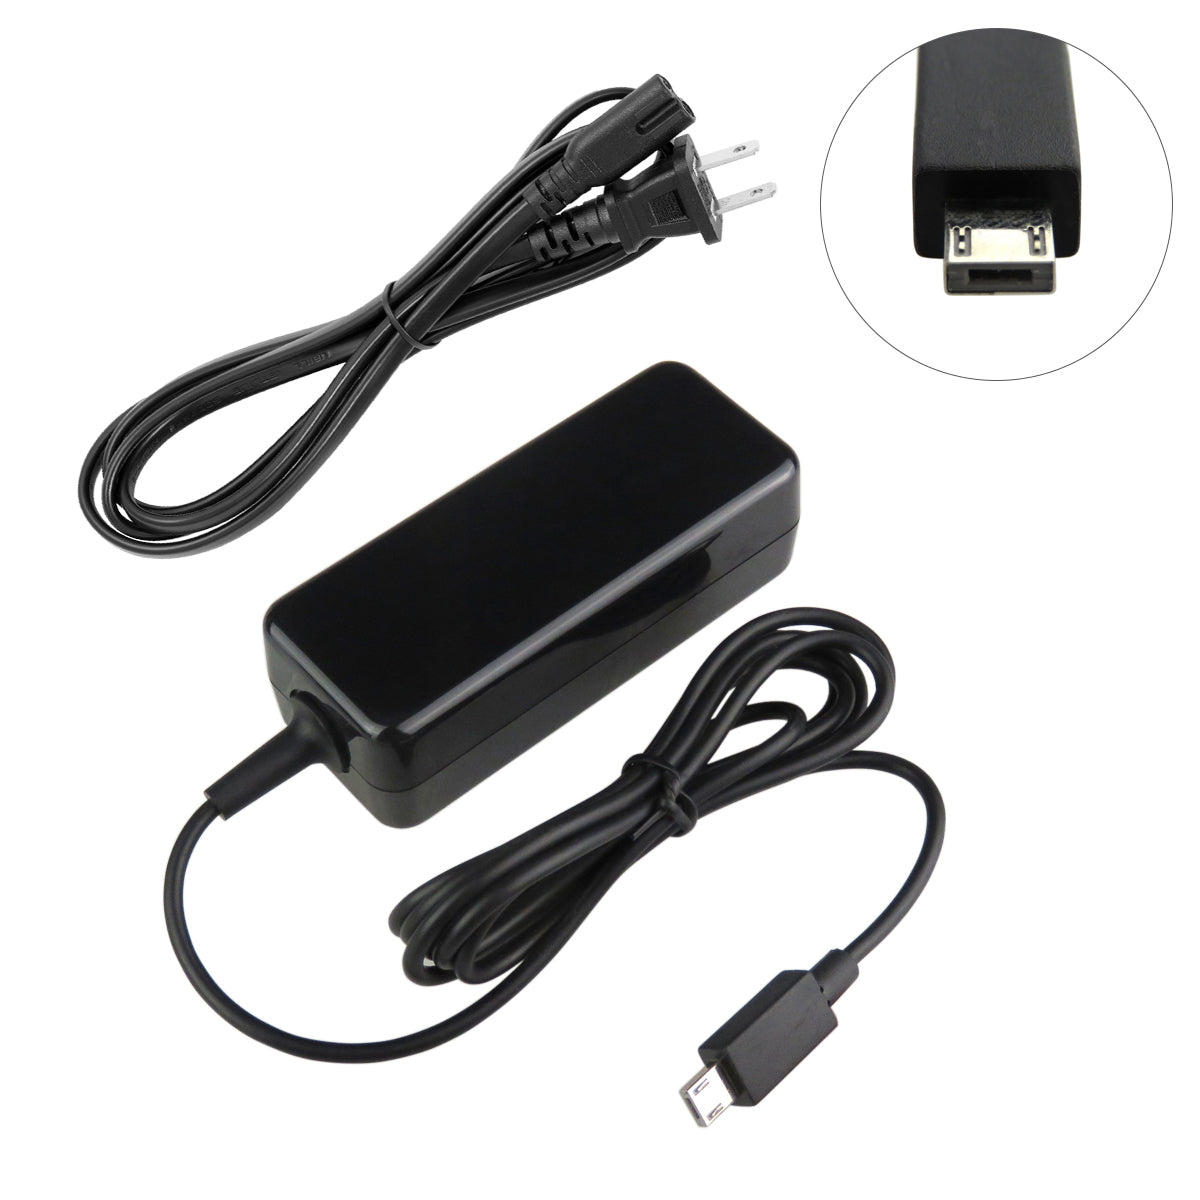 Charger for ASUS TP200SA Transformer Book Laptop.